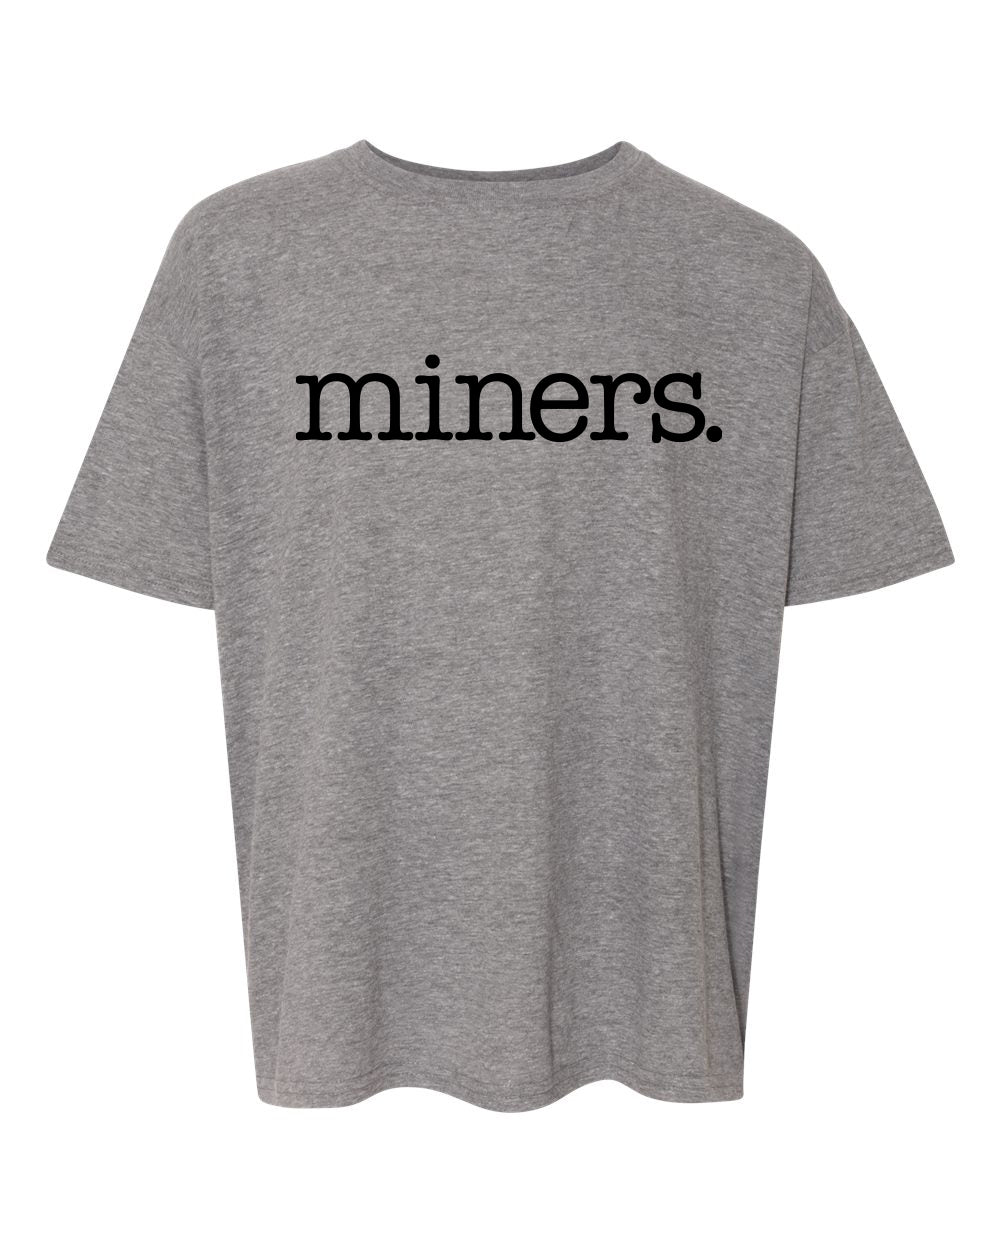 miners. YOUTH T-Shirt